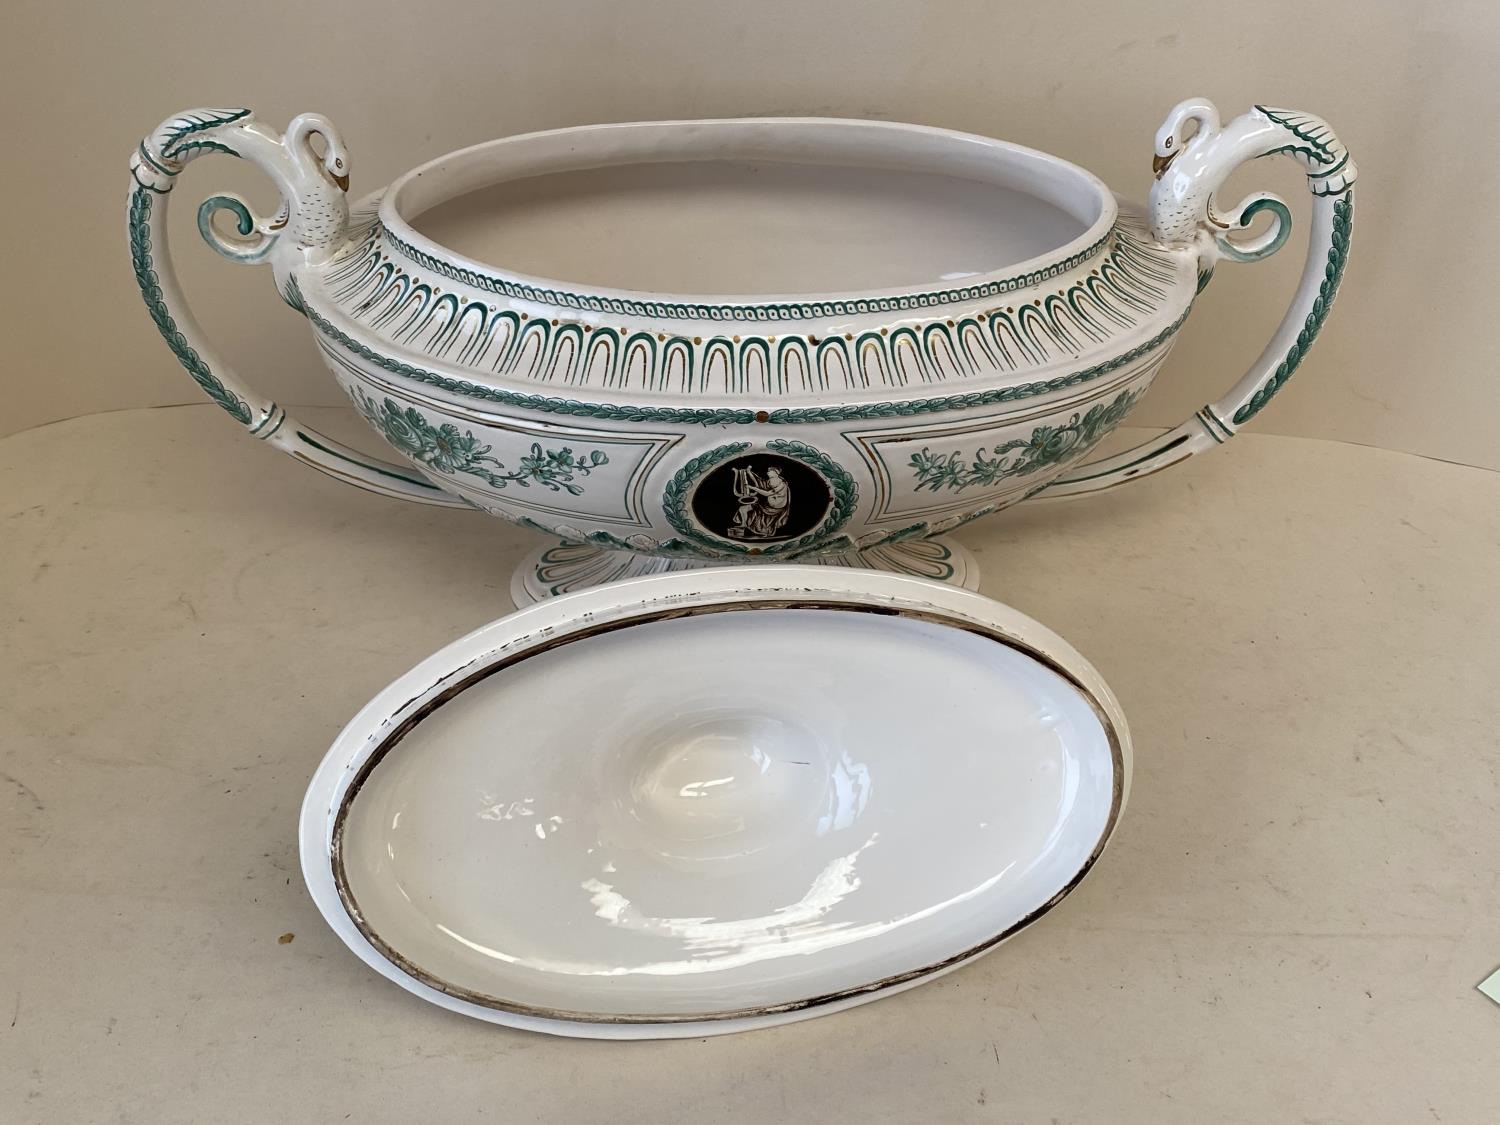 Large French early C19th French lidded tureen on a matching base by Veuve Perrin (1748-1803) - Image 7 of 8